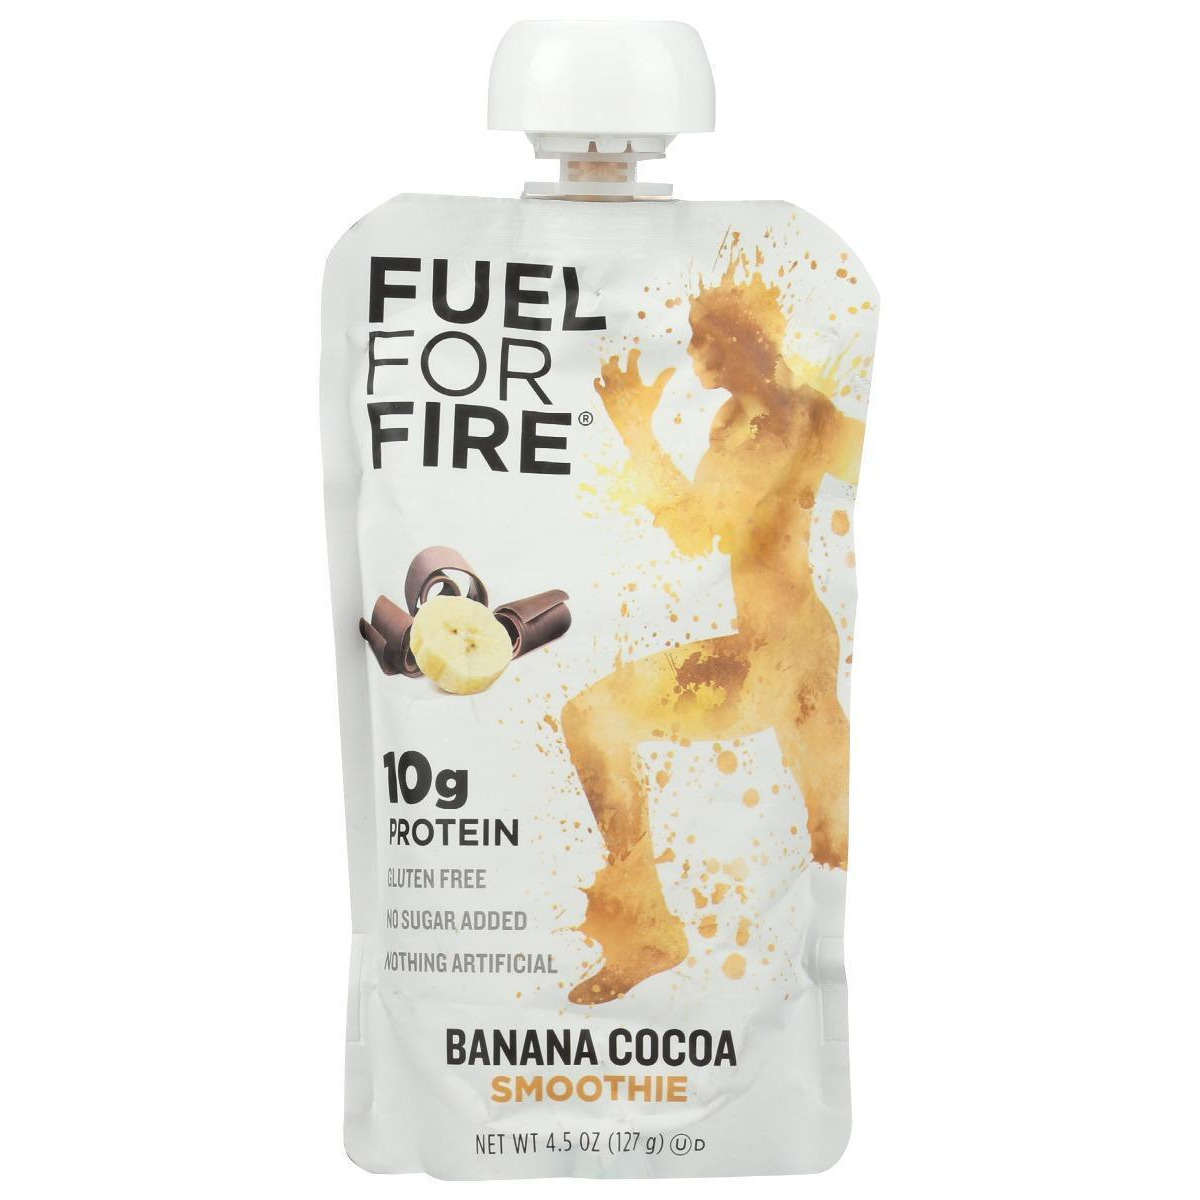 Fuel for Fire KHRM00199232 4.5 oz Smoothie Protein Banana Cocoa Drink